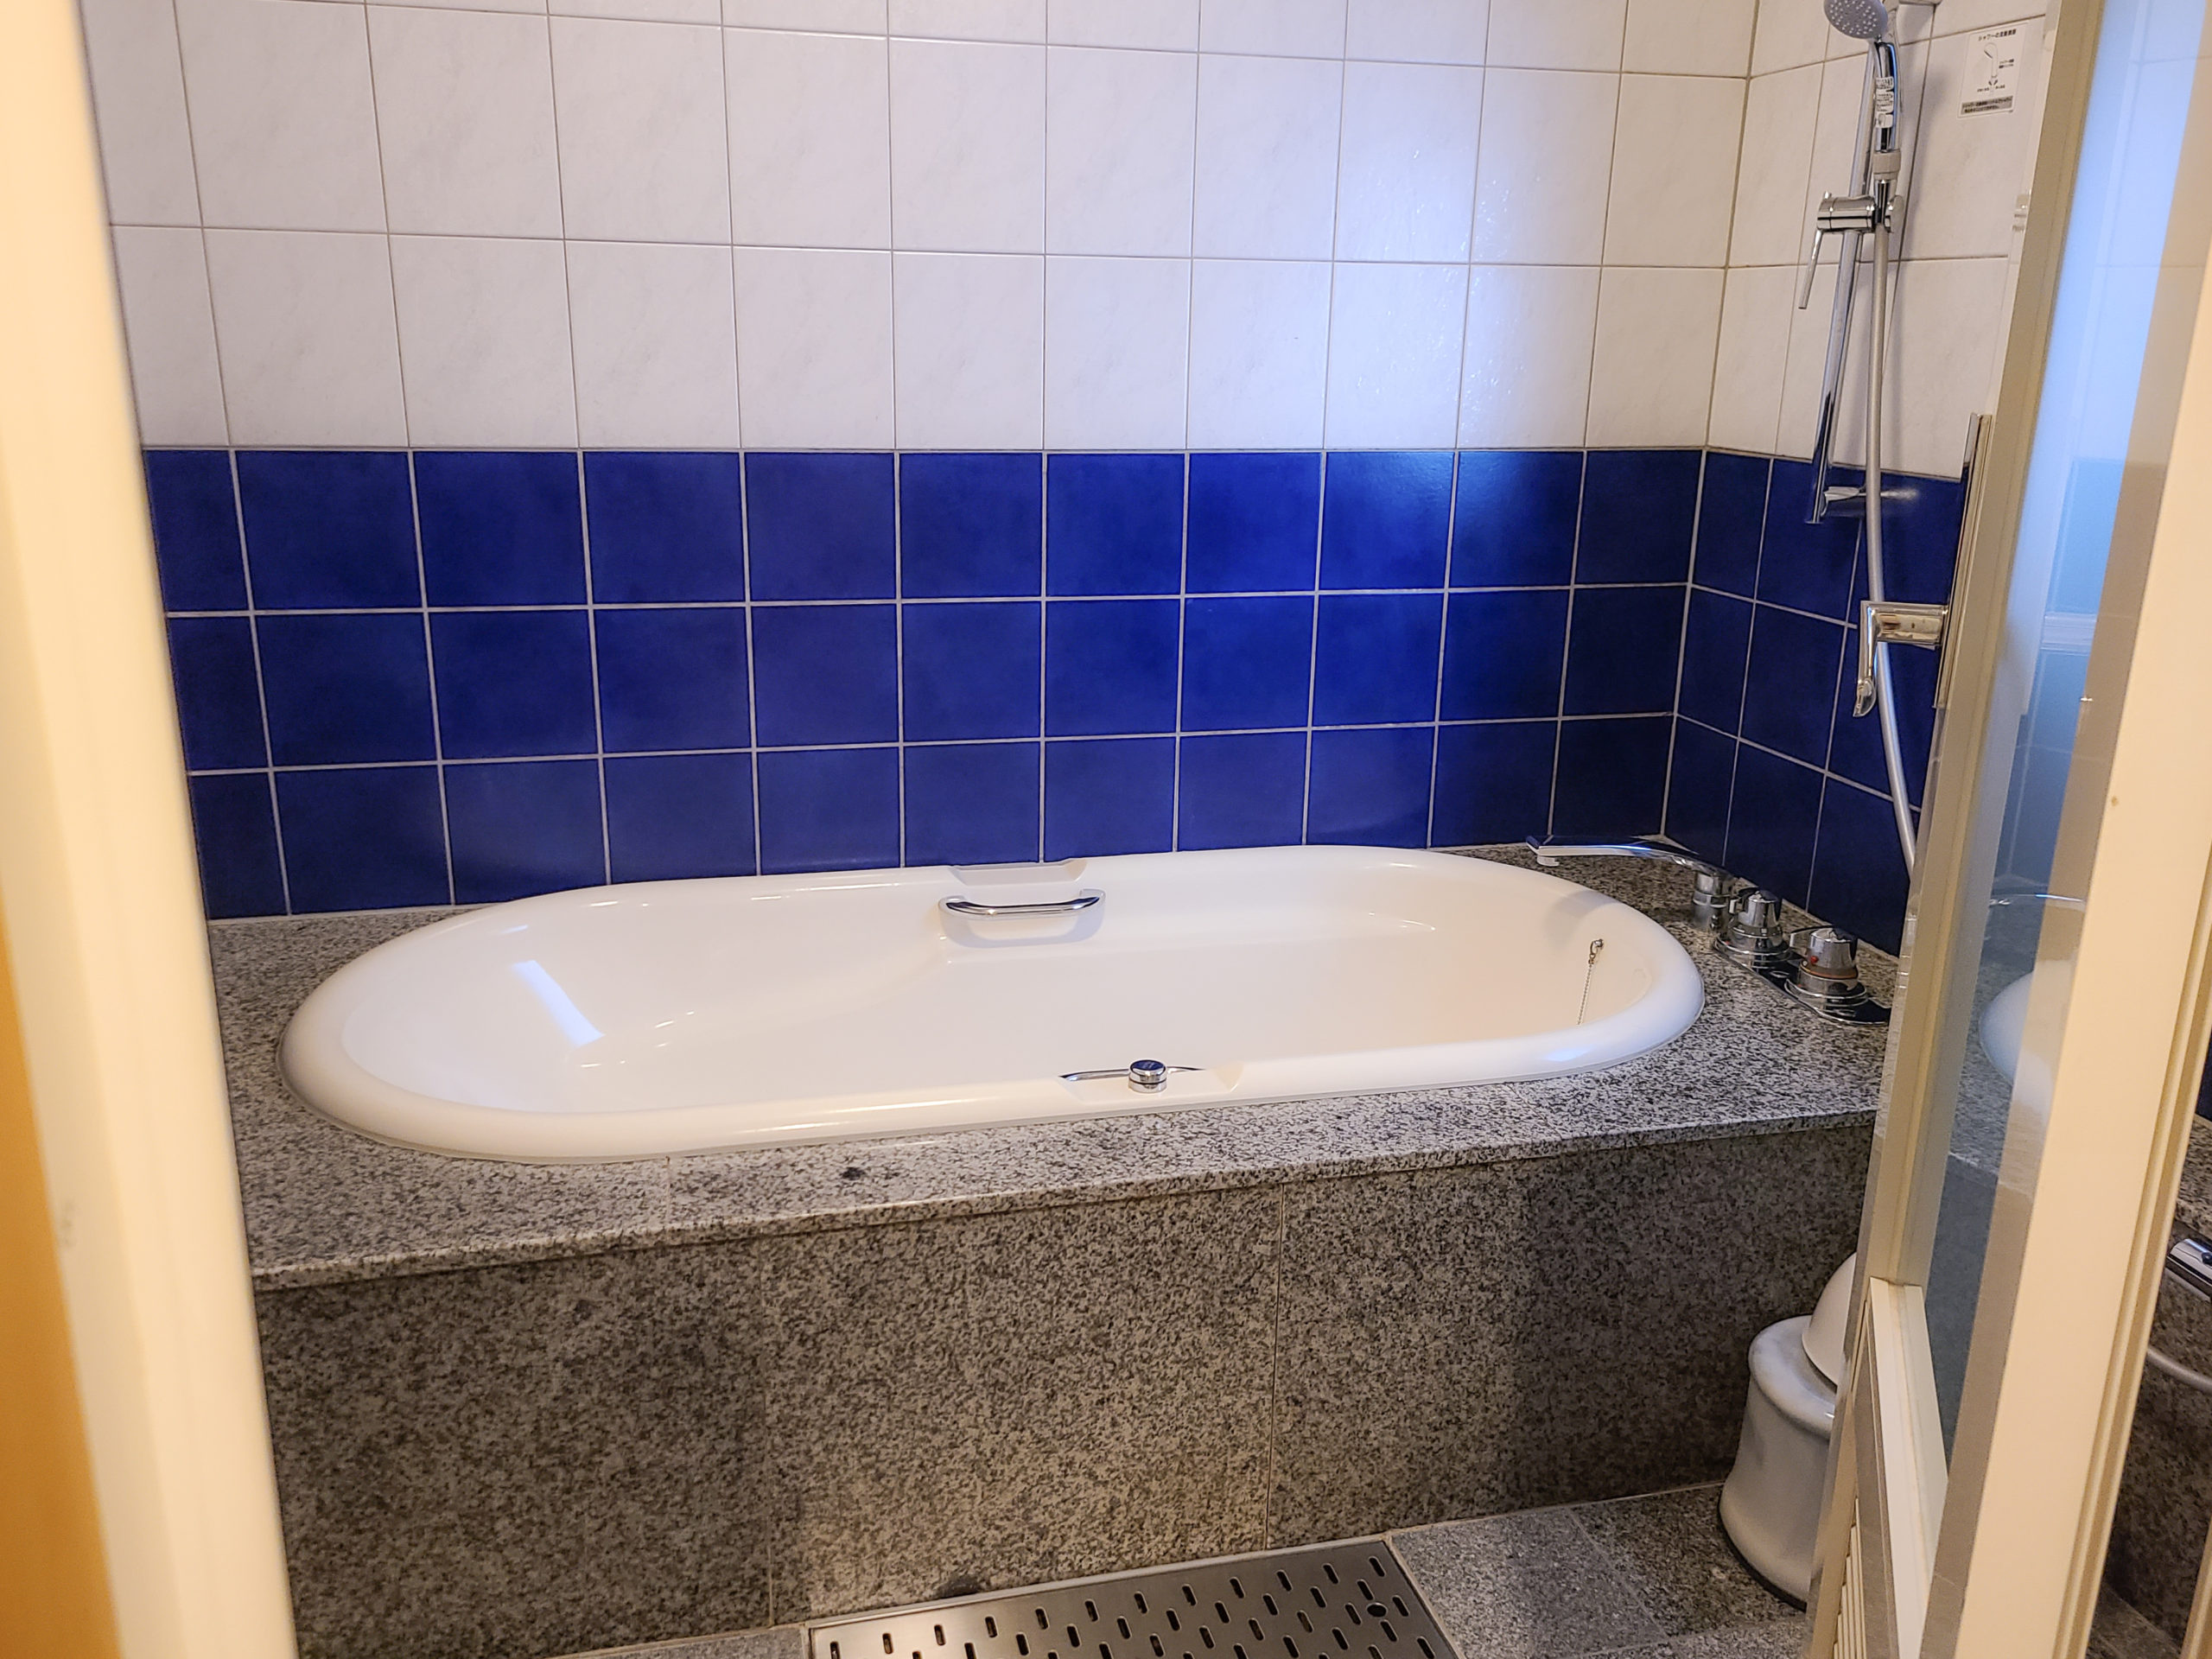 The bathtubs are also slightly larger than what you would find at a regular hotel or ryokan.